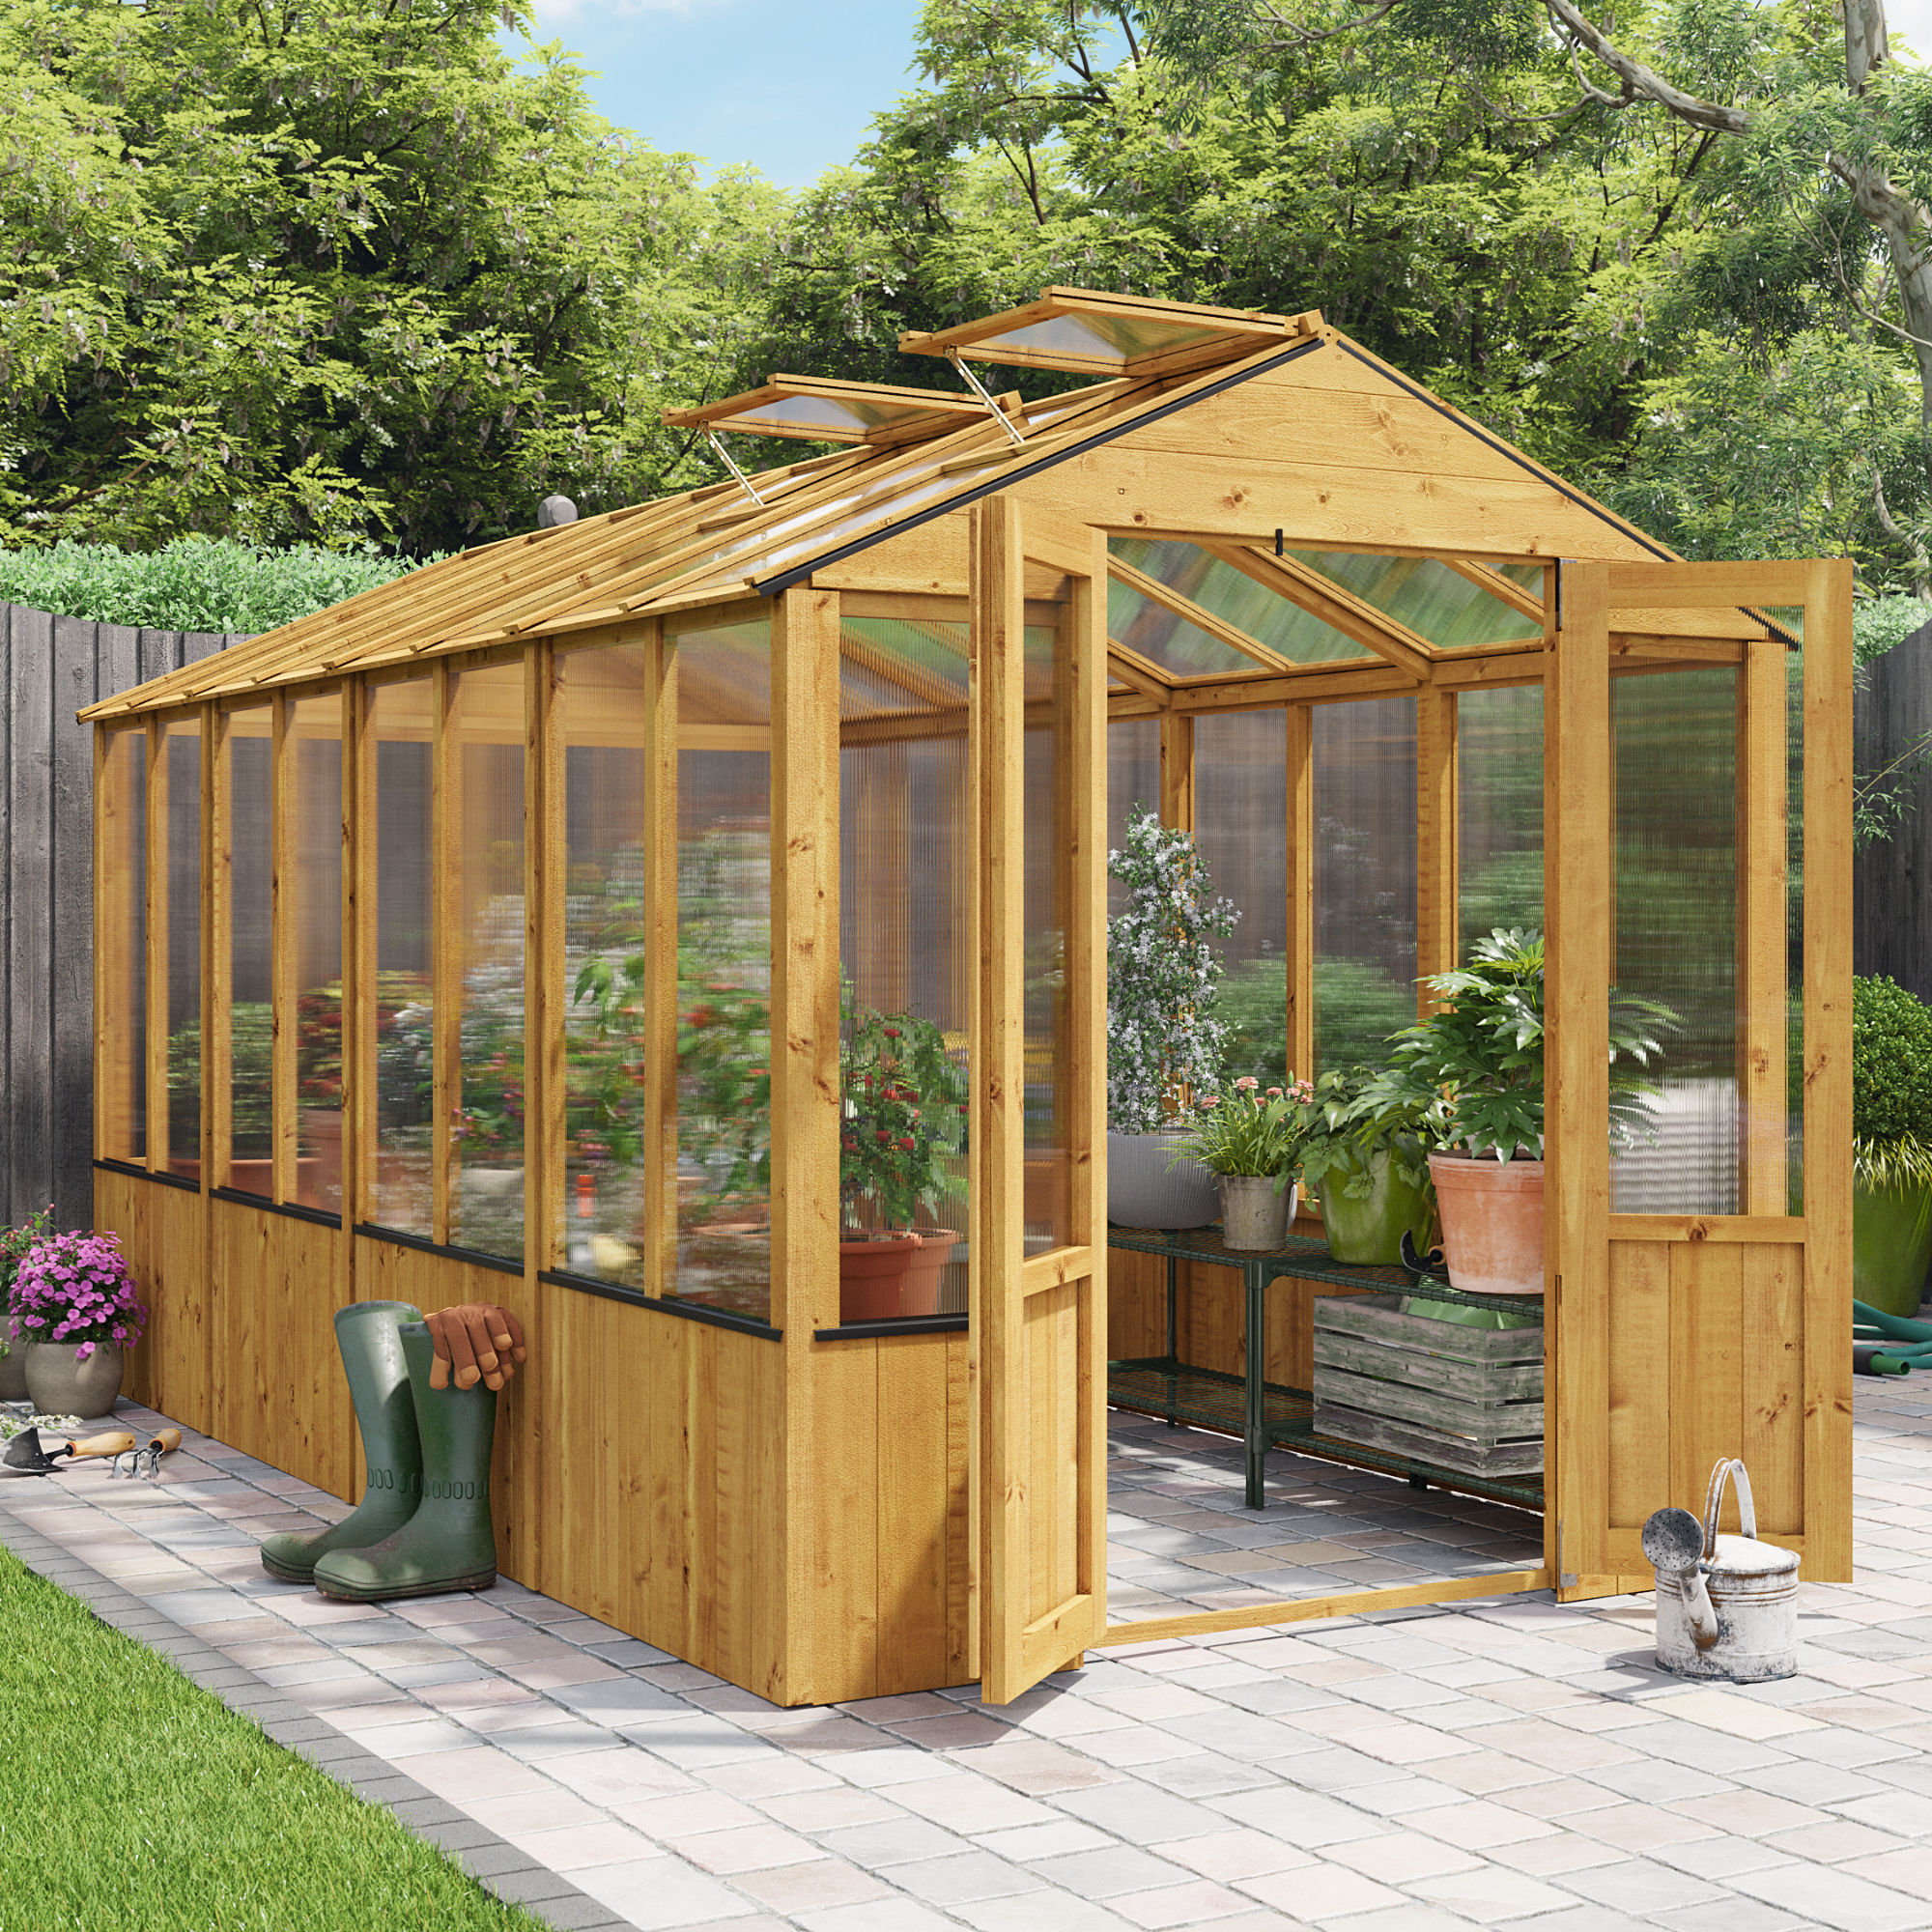 12x6 Wooden Polycarbonate Greenhouse with Opening Roof Vent | BillyOh